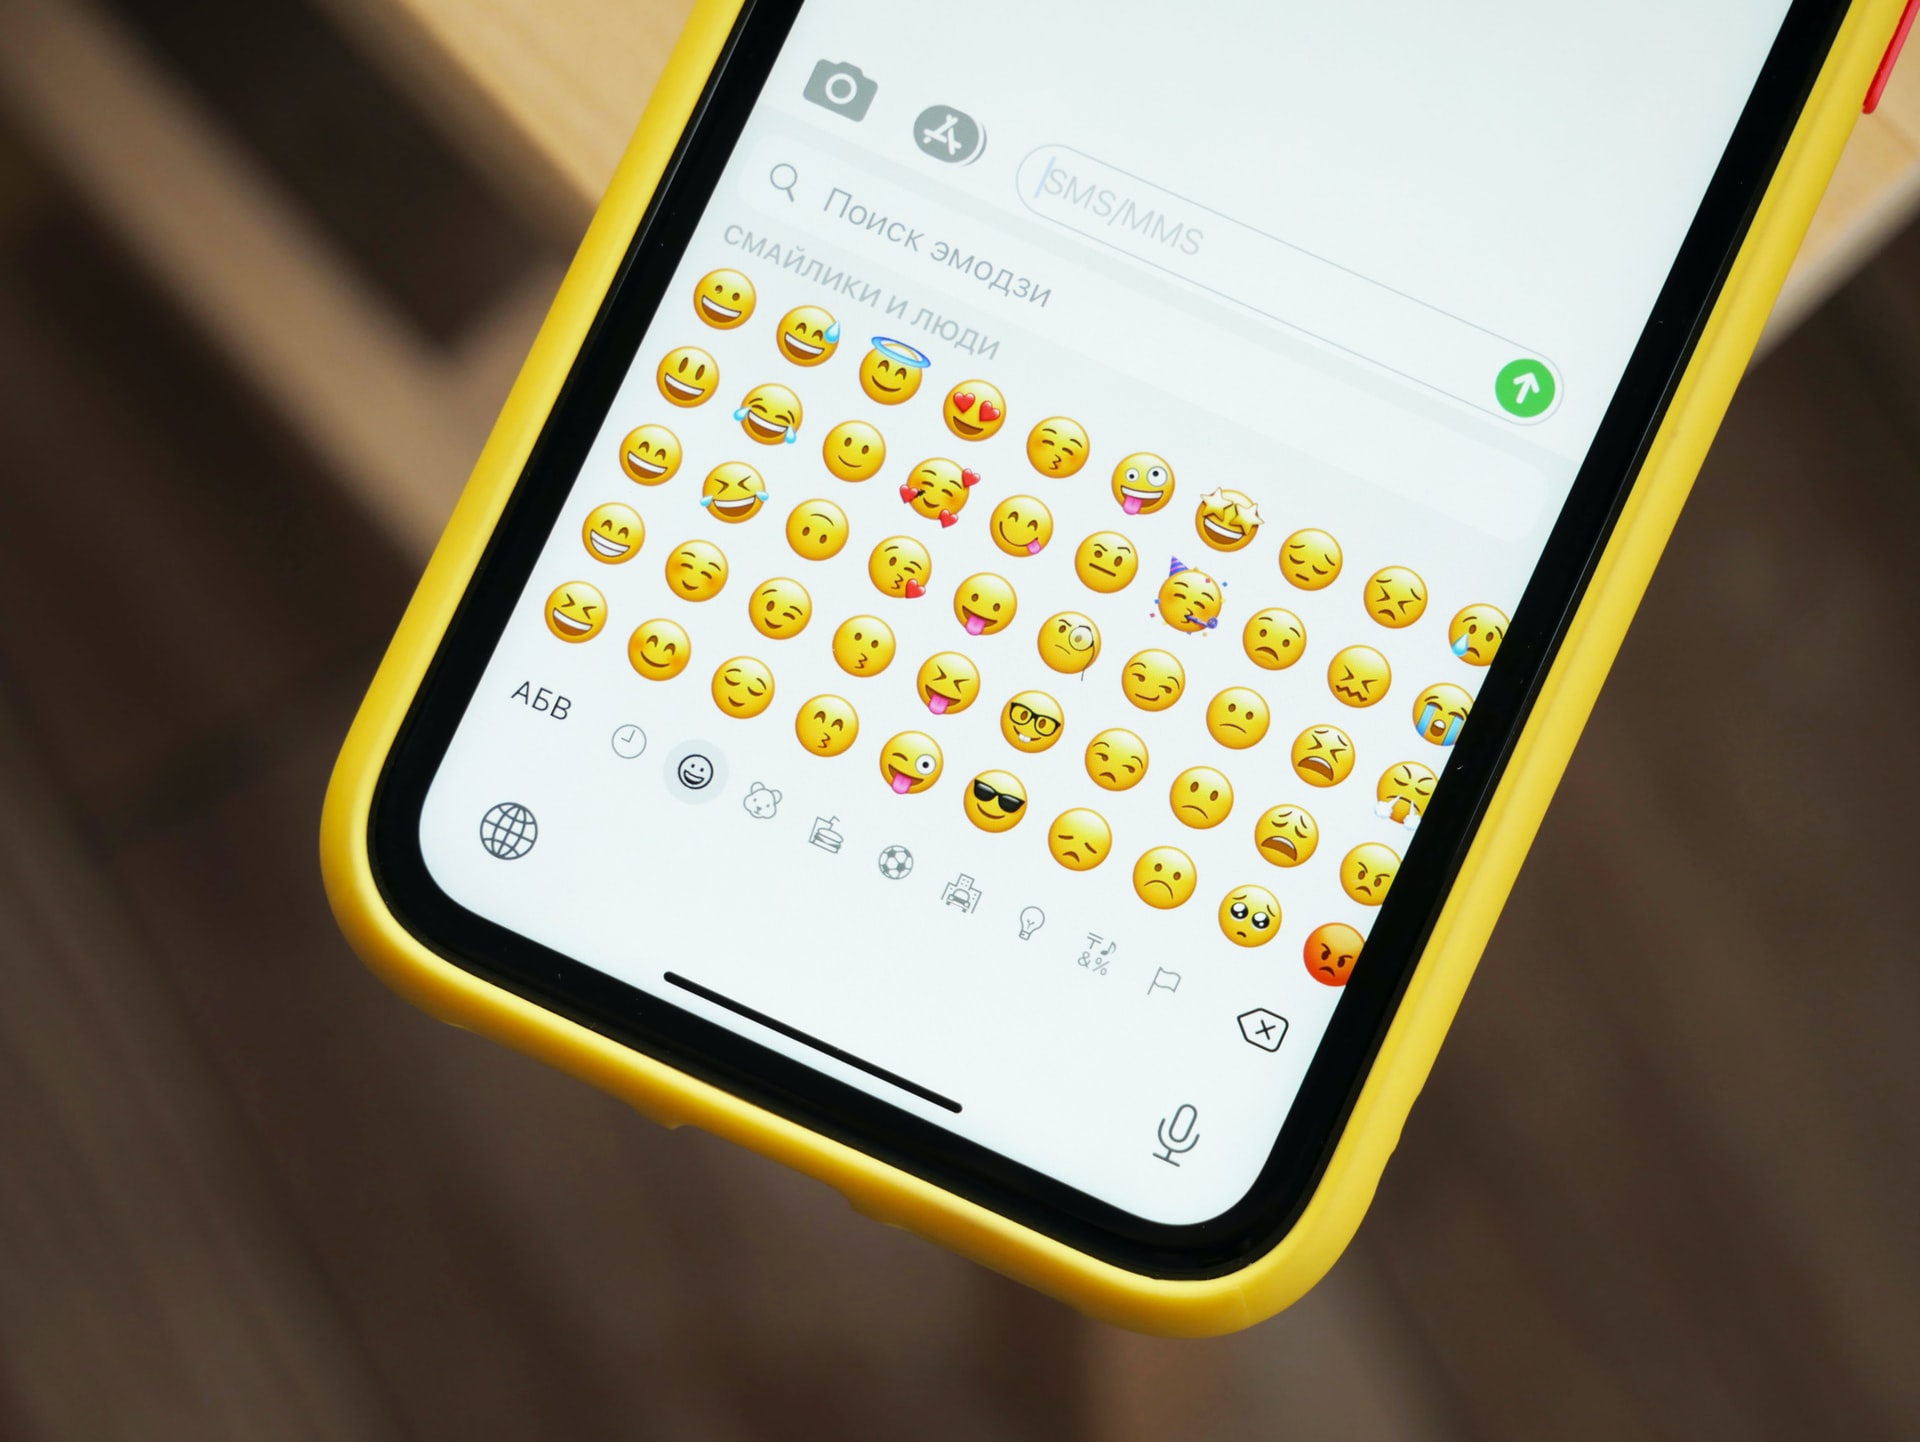 Is the smiley face passive aggressive? We asked Gen-Z and Millennials what  the emoji means to them